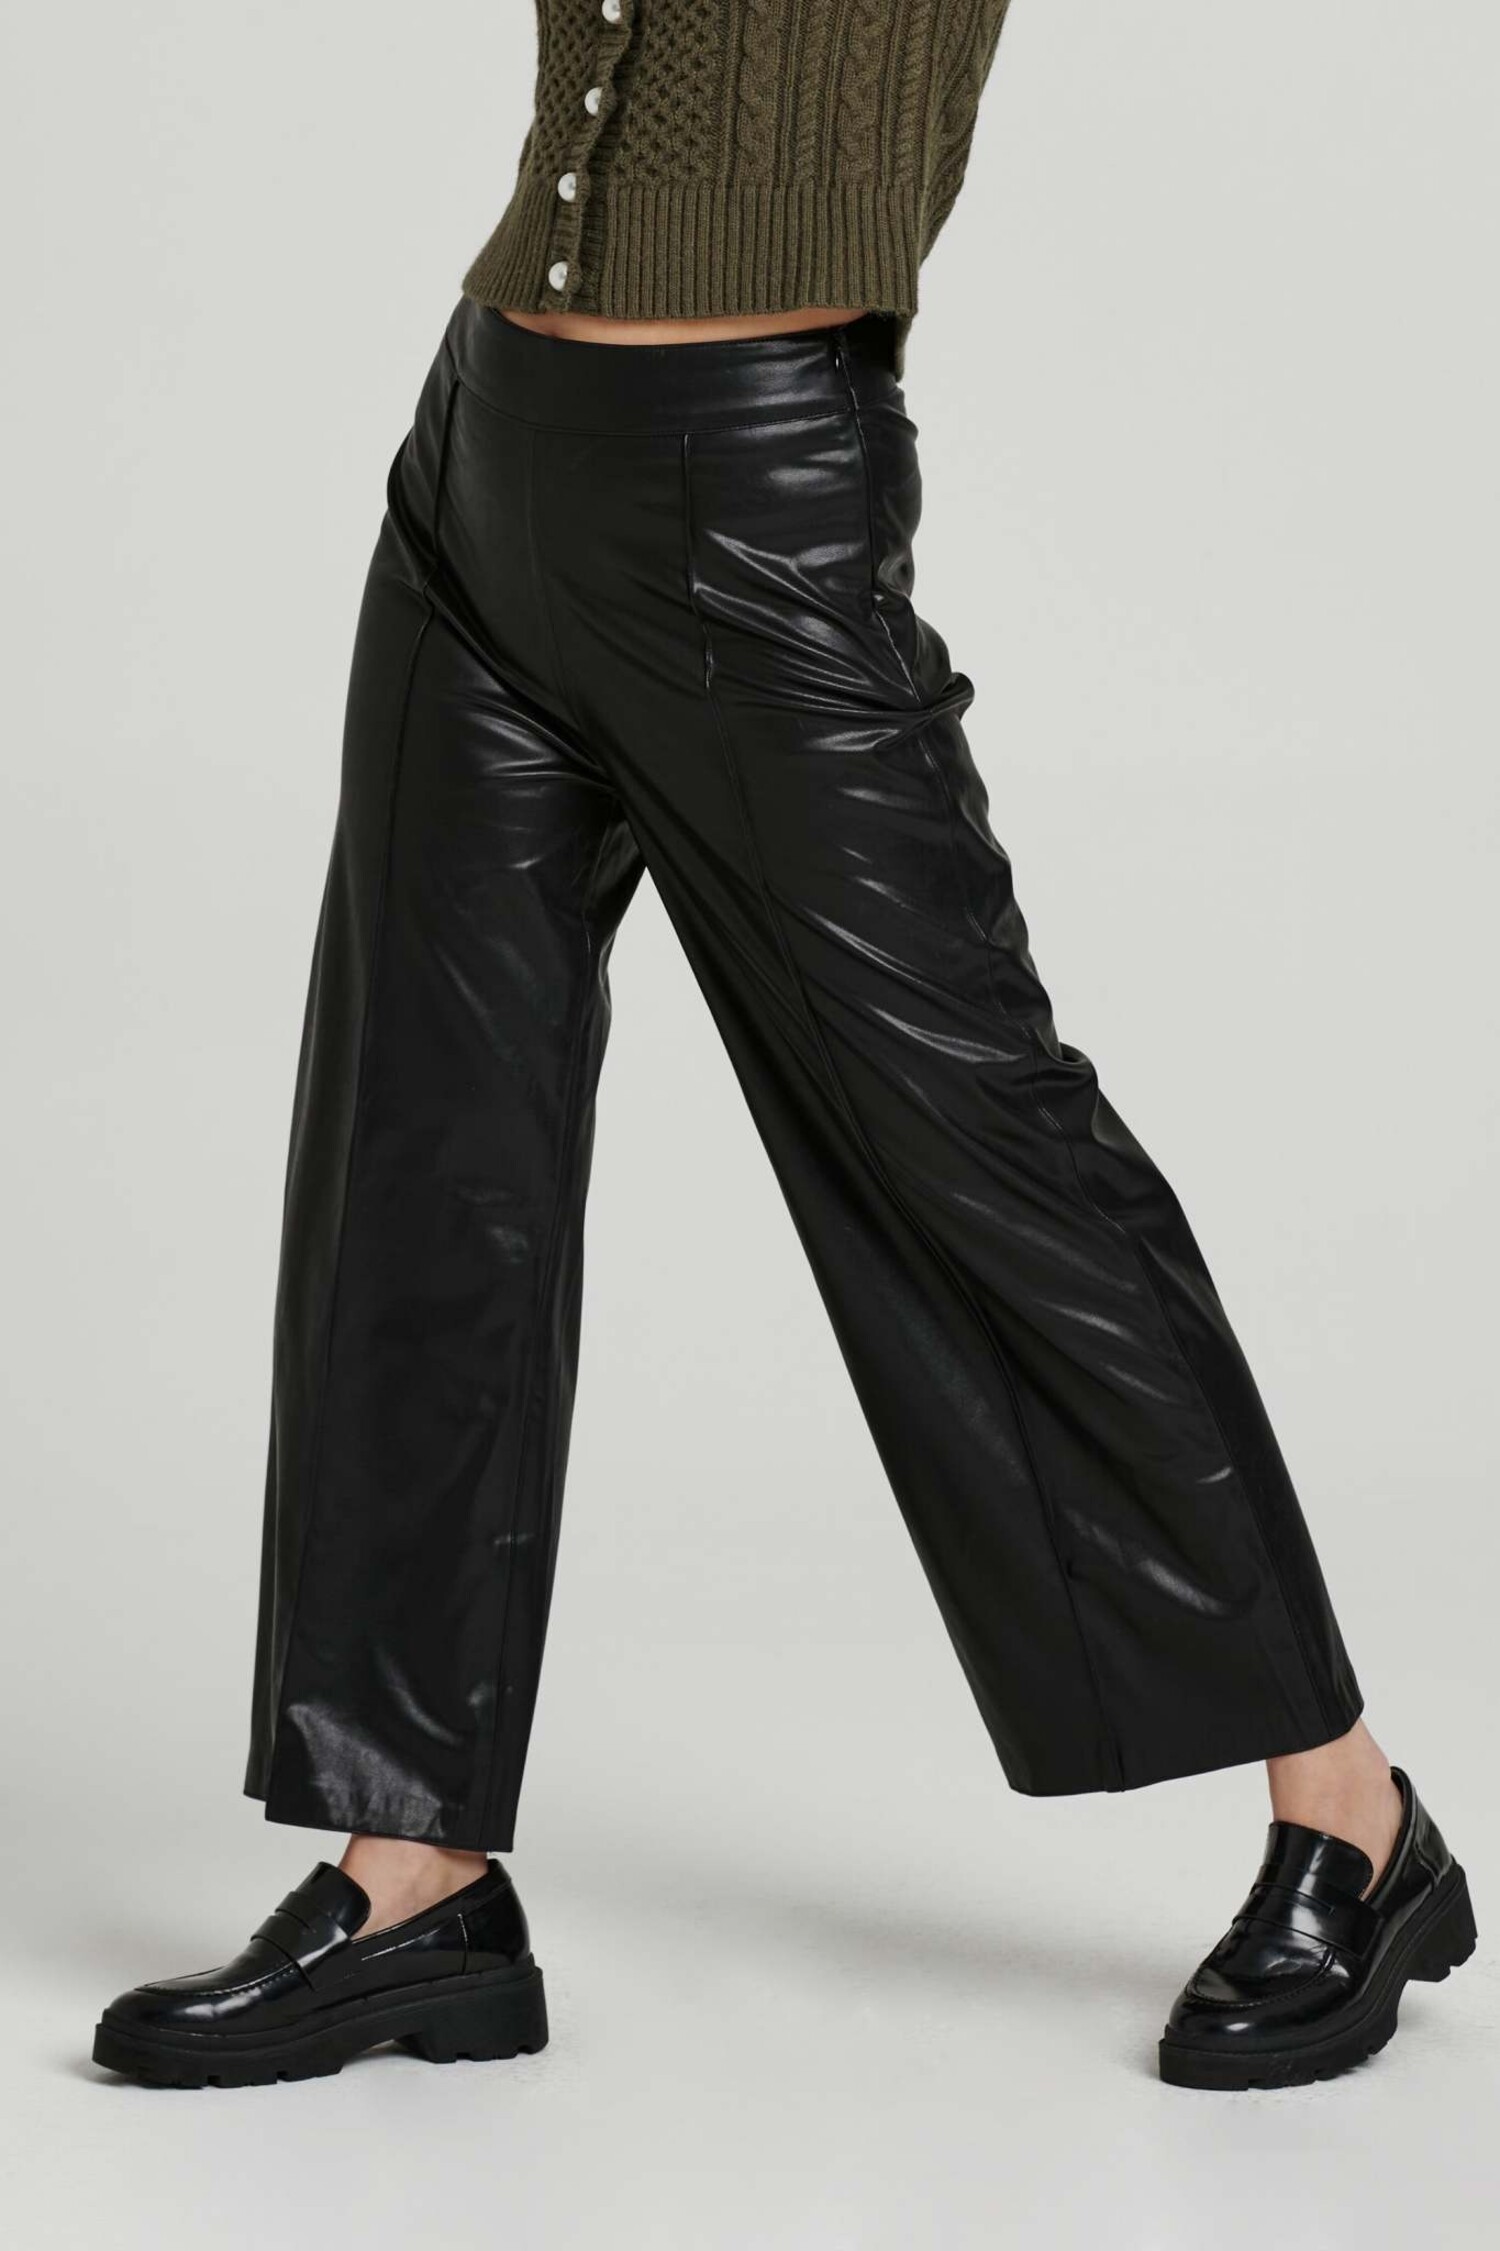 10 pairs of wide-legged trousers to shop now and wear forever | Leather  pants style, Leather trousers outfit, Womens wide leg pants